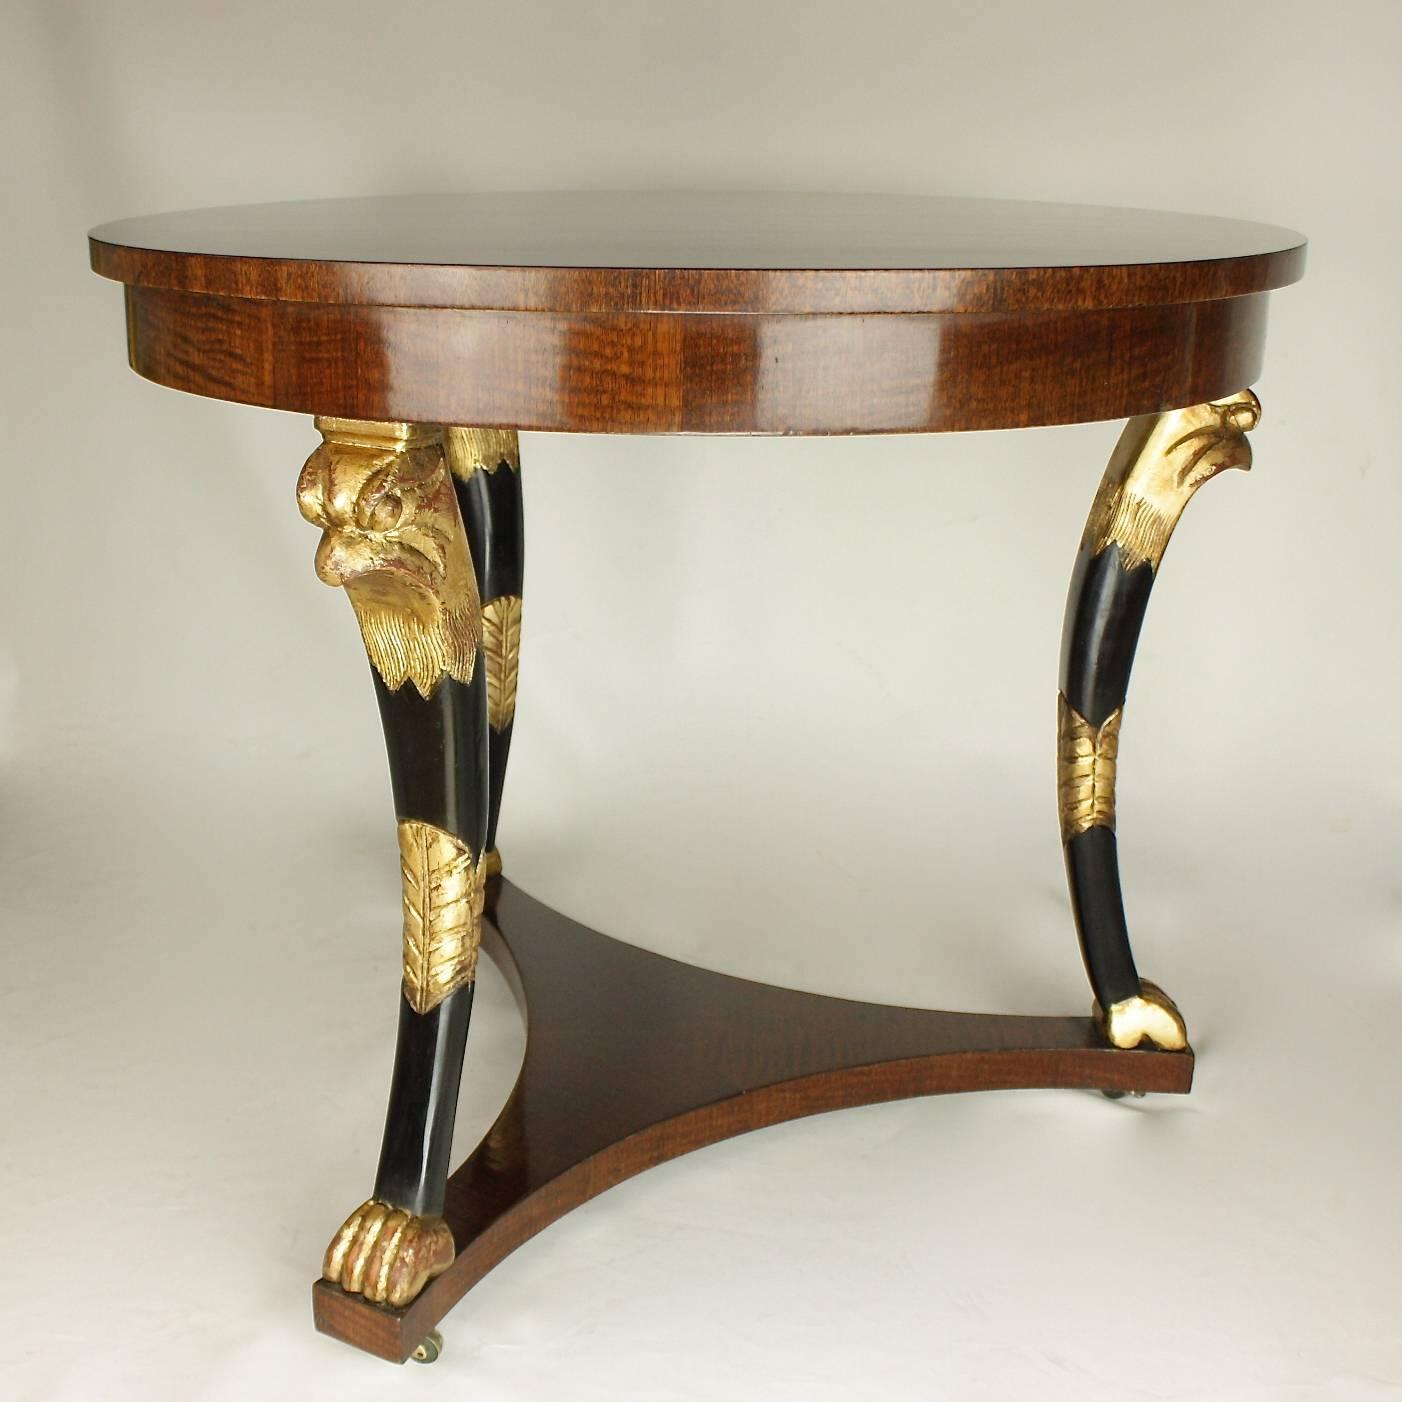 French Late 19th Century Empire Style Centre Table